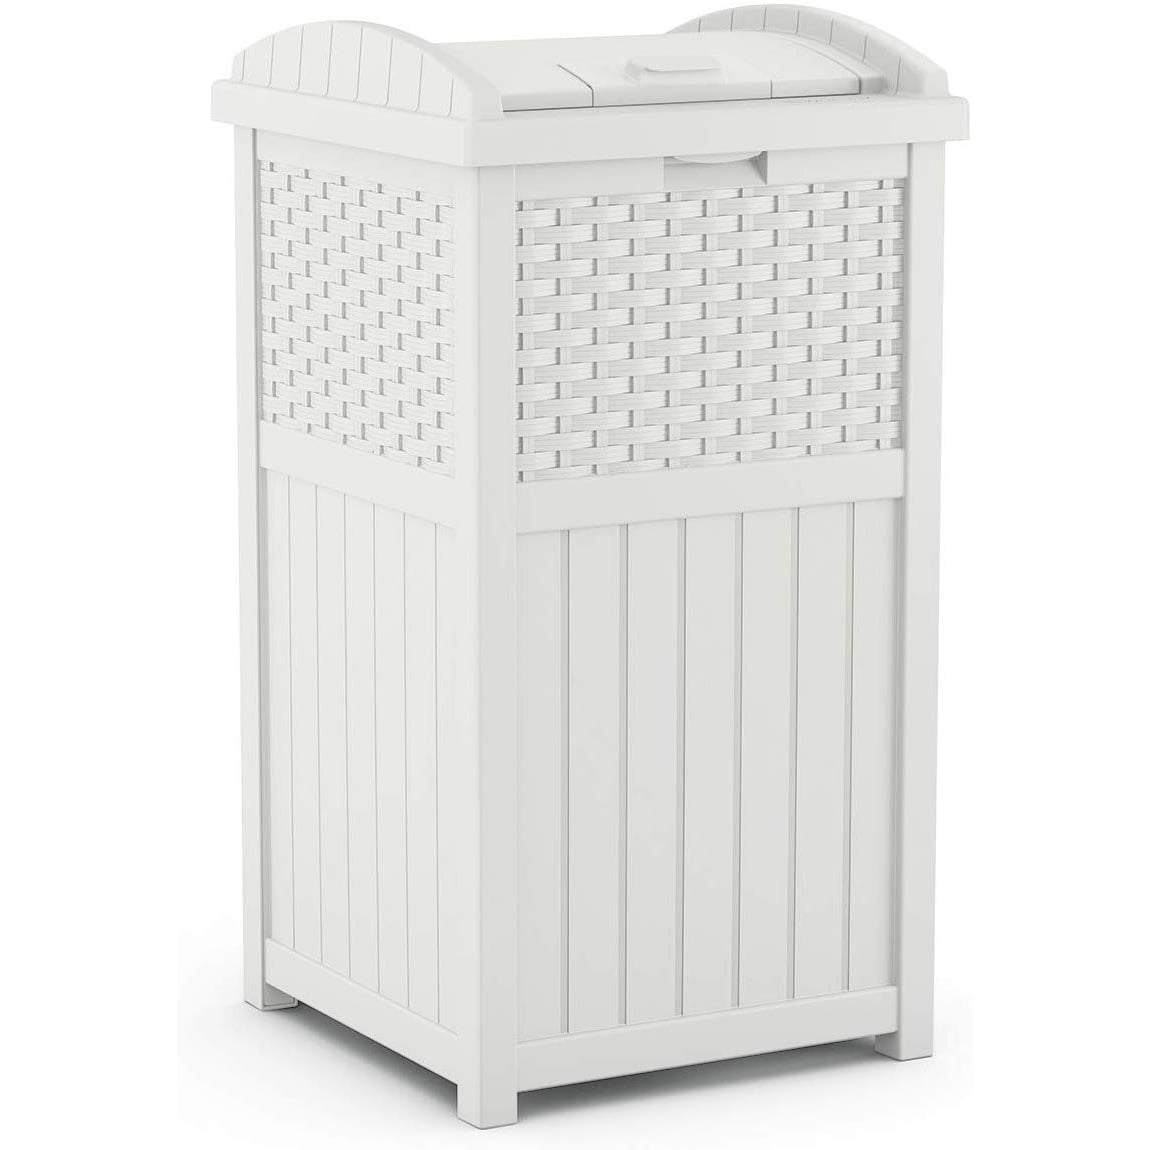 Details about   Suncast 33 Gallon Hideaway Can Resin Outdoor Trash with Lid Use in Backyard, 